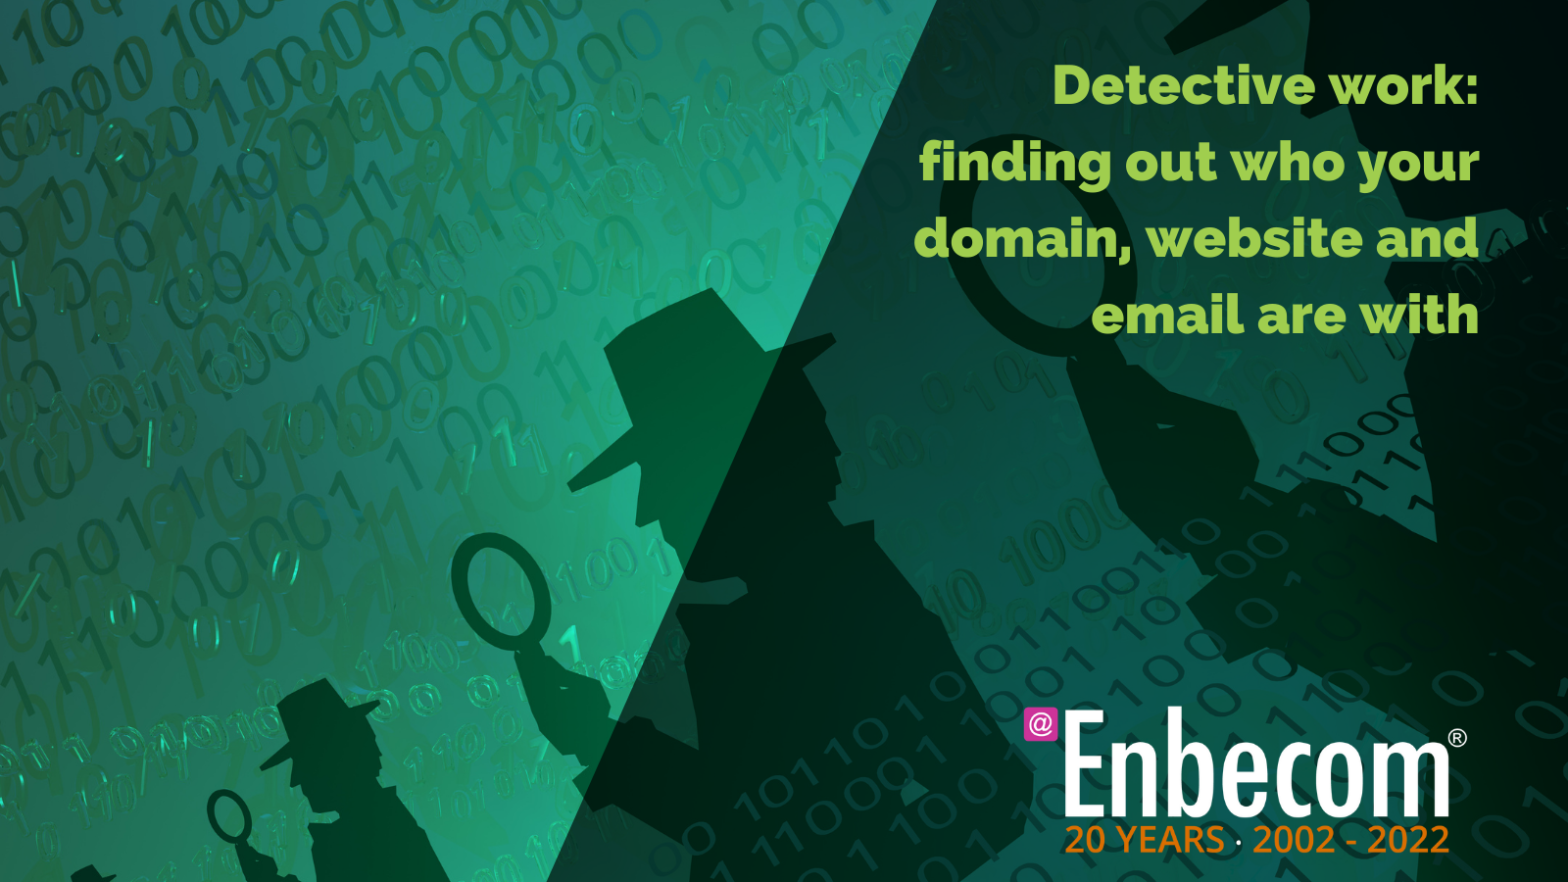 Detective work: finding out who your domain, website and email are with